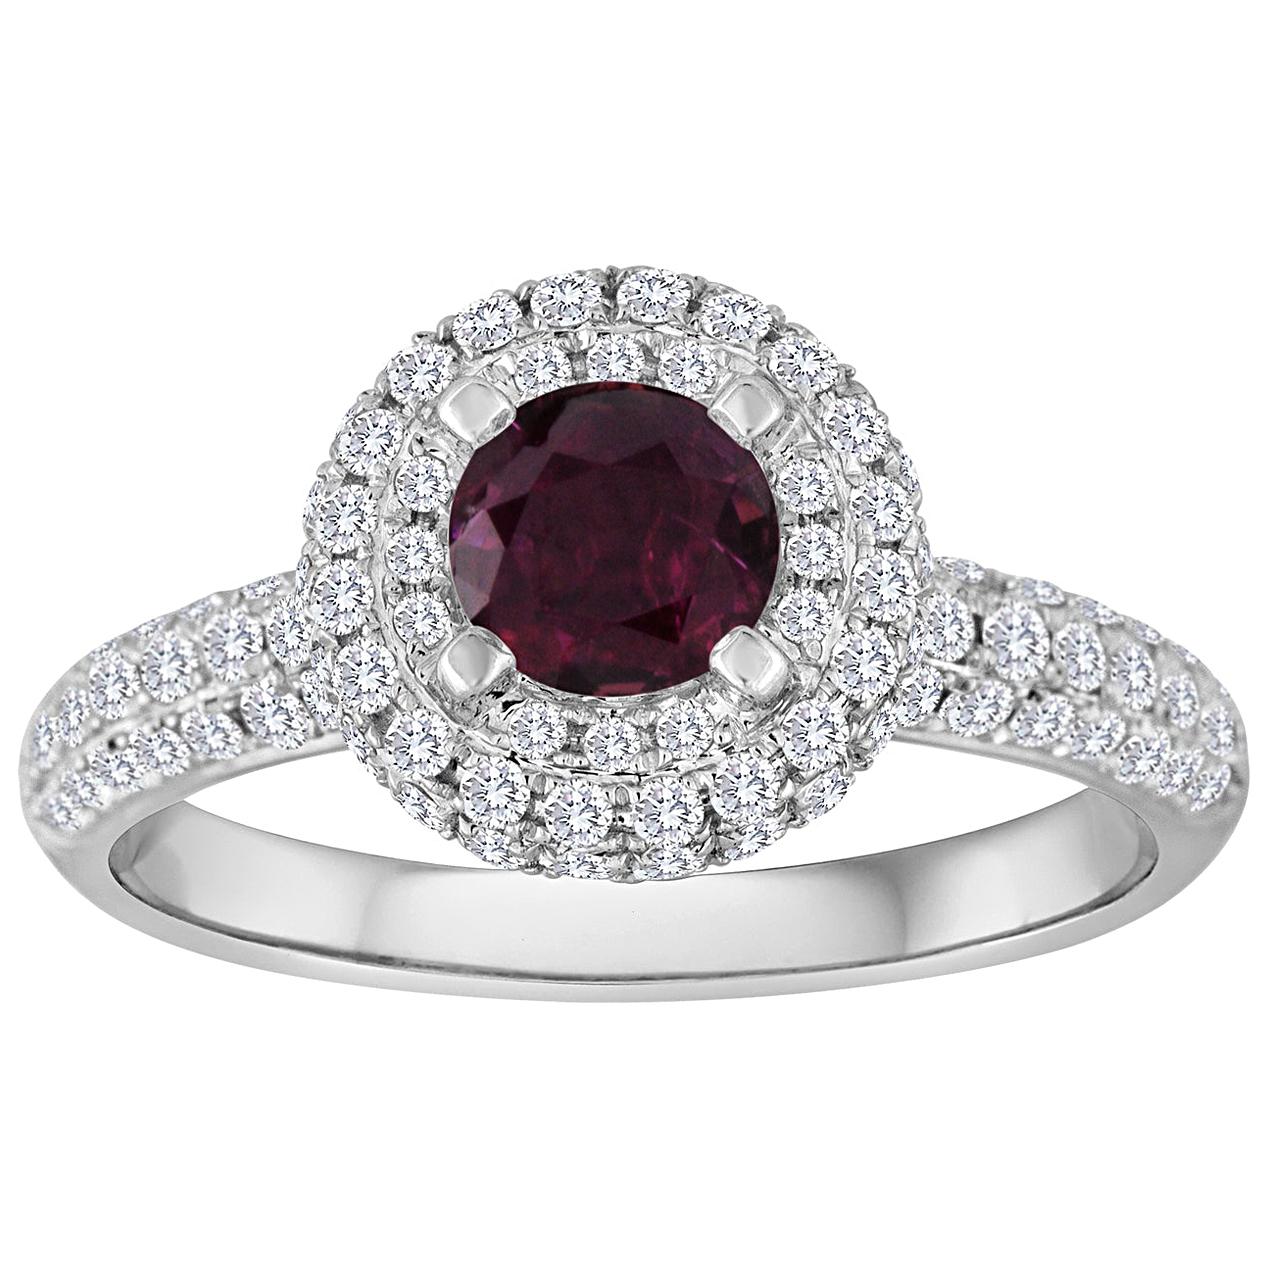 AGL Certified 0.89 Carat Round Ruby Diamond Gold Pave Ring